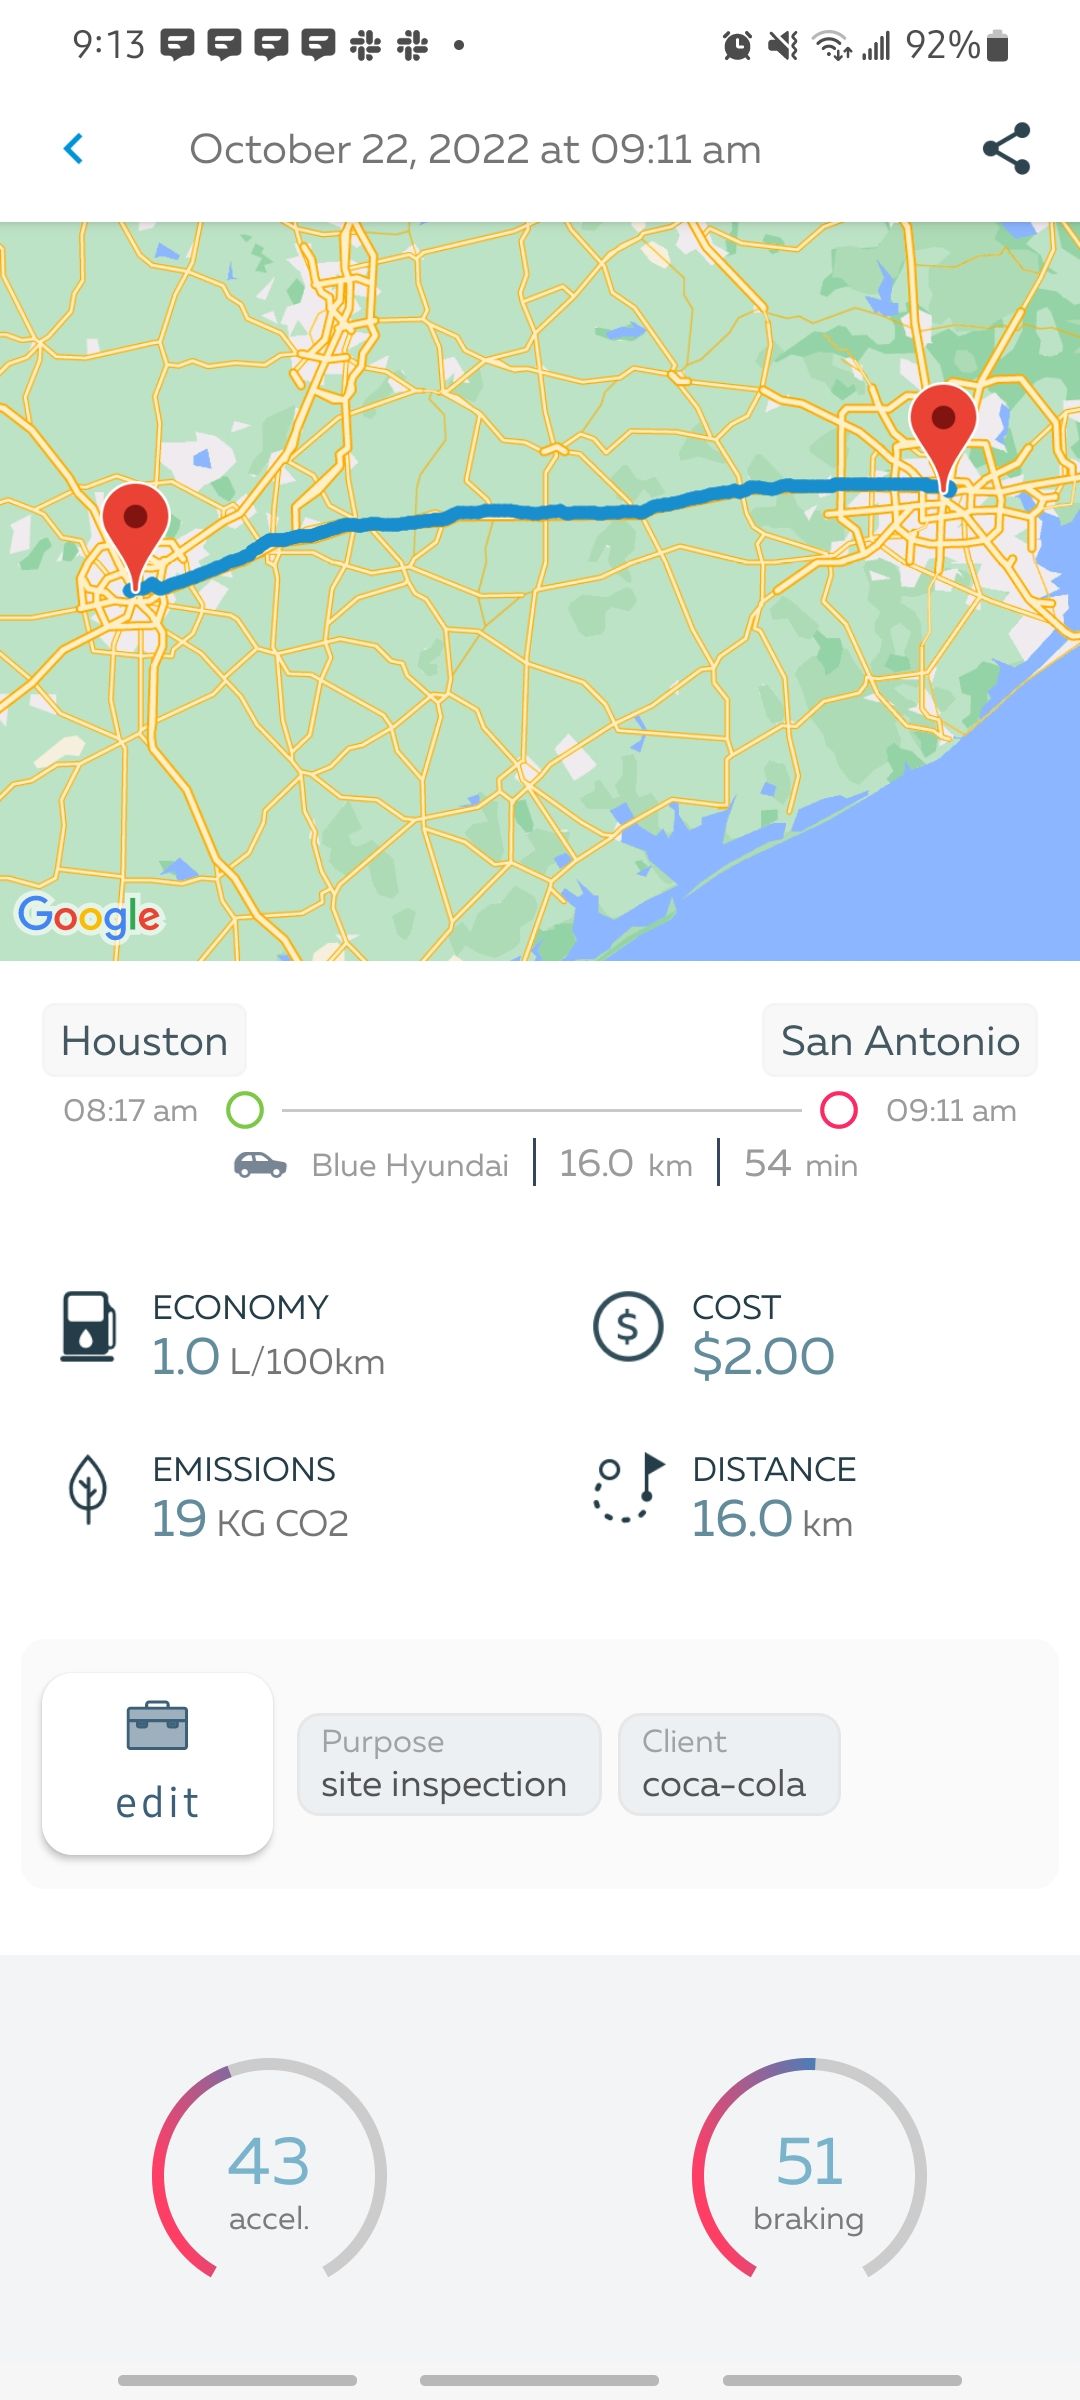 gofar app taking a closer look at a trip with its cost and mileage